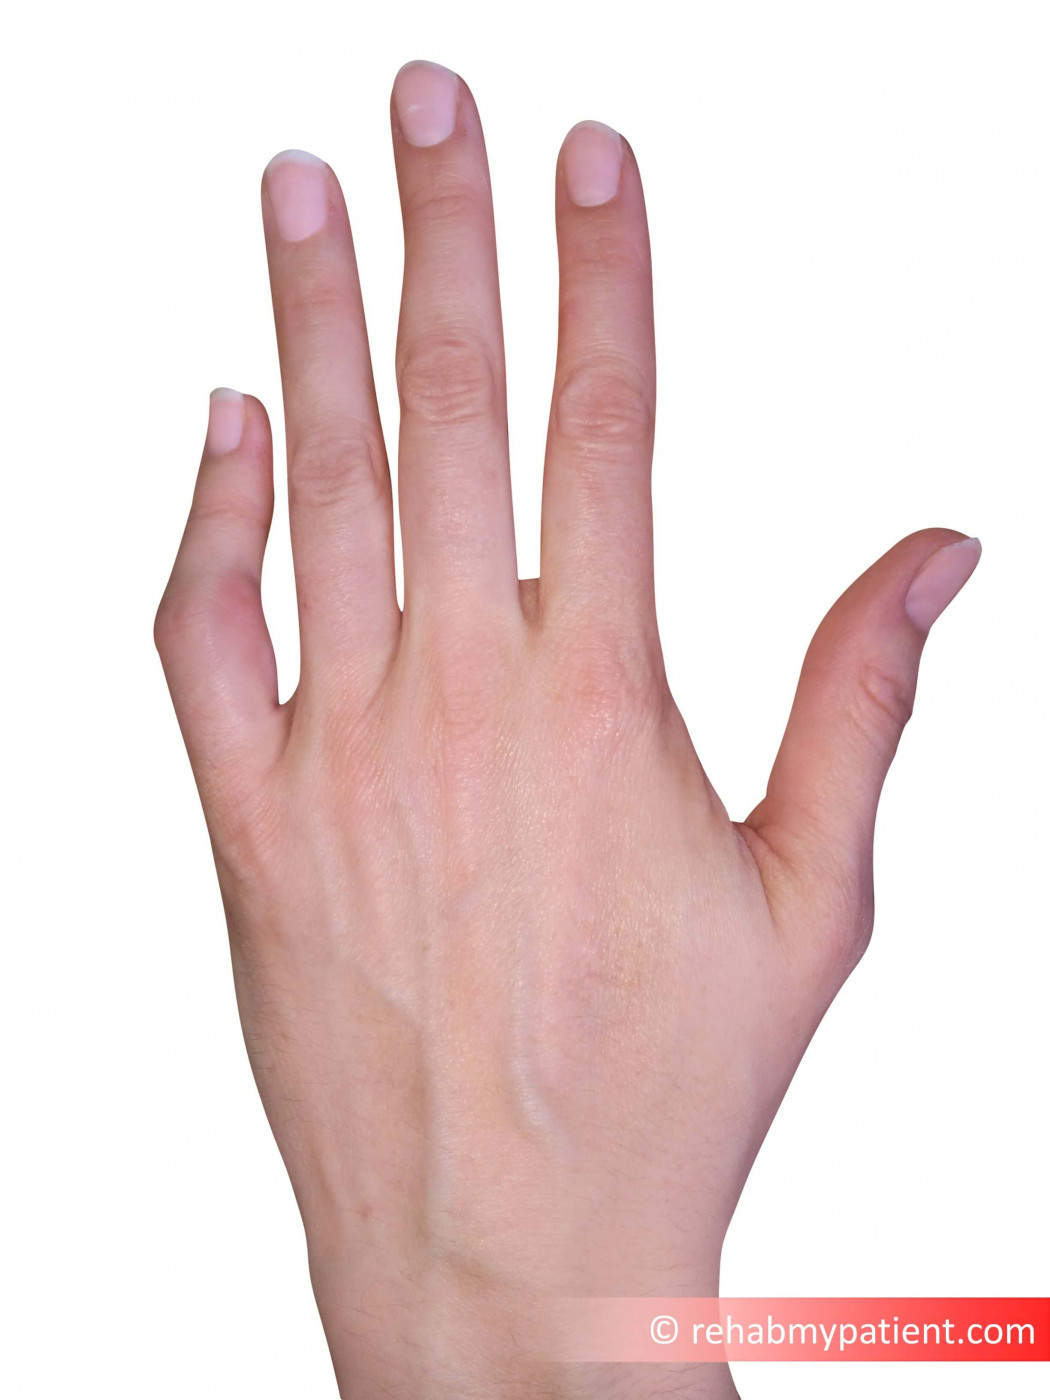 Finger Proximal Interphalangeal (PIP) Joint Dislocation